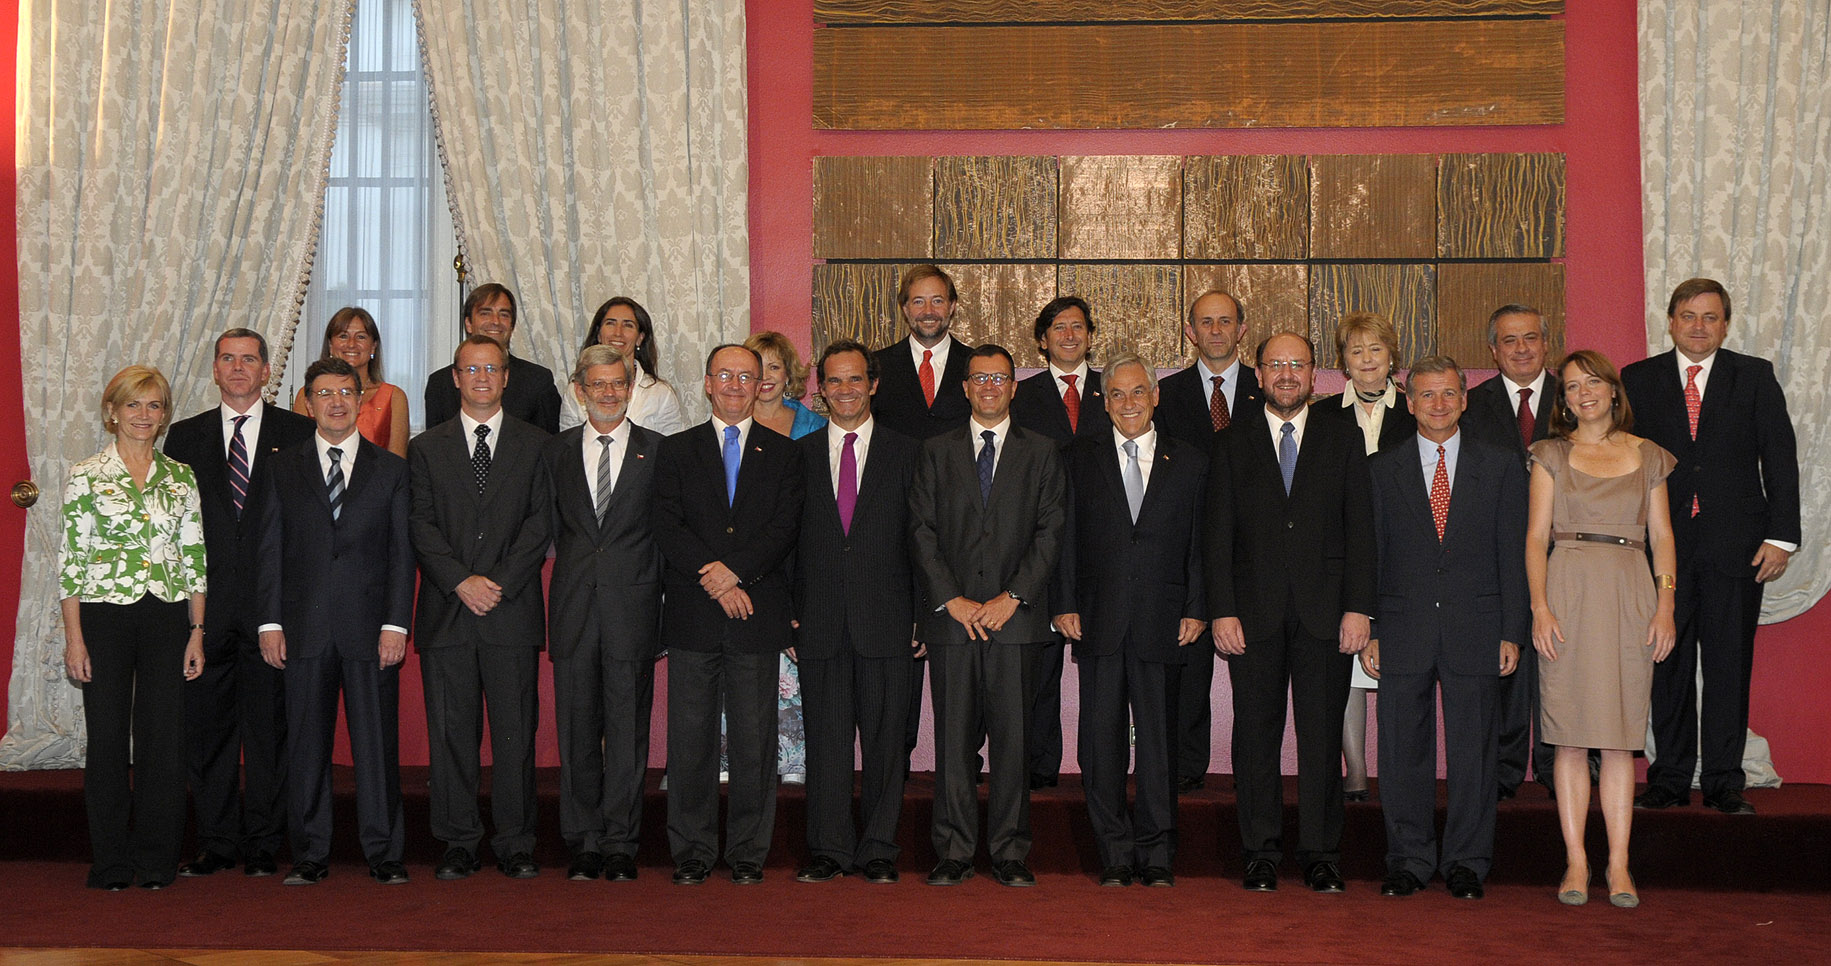 a group of people in suits and ties posing for a po